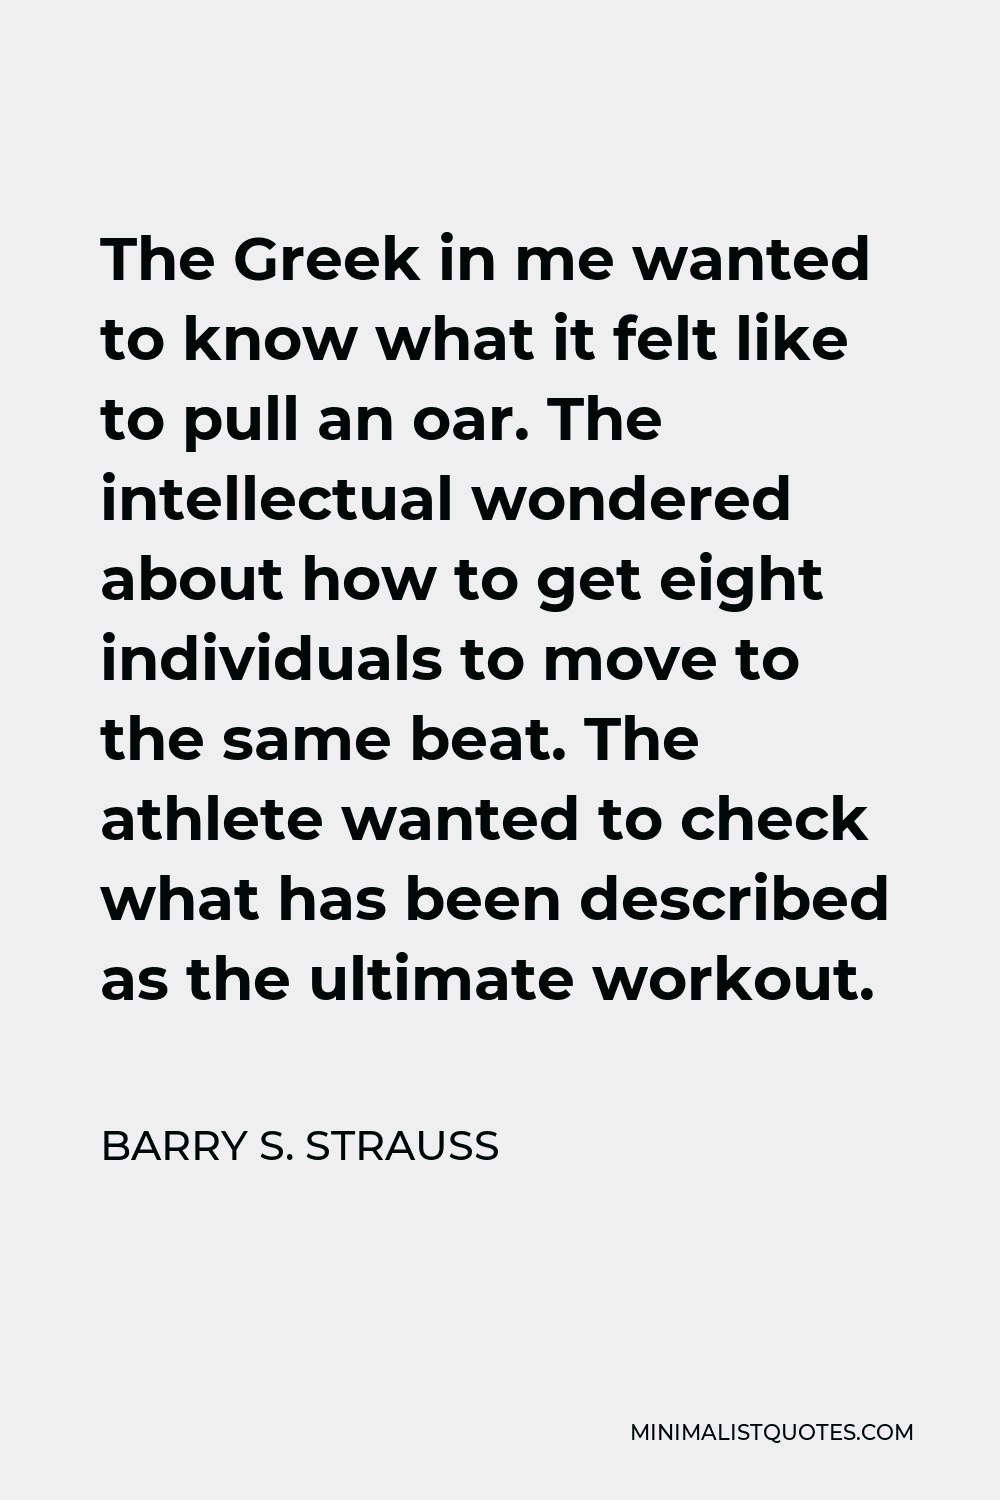 Barry S. Strauss Quote - The Greek in me wanted to know what it felt like to pull an oar. The intellectual wondered about how to get eight individuals to move to the same beat. The athlete wanted to check what has been described as the ultimate workout.